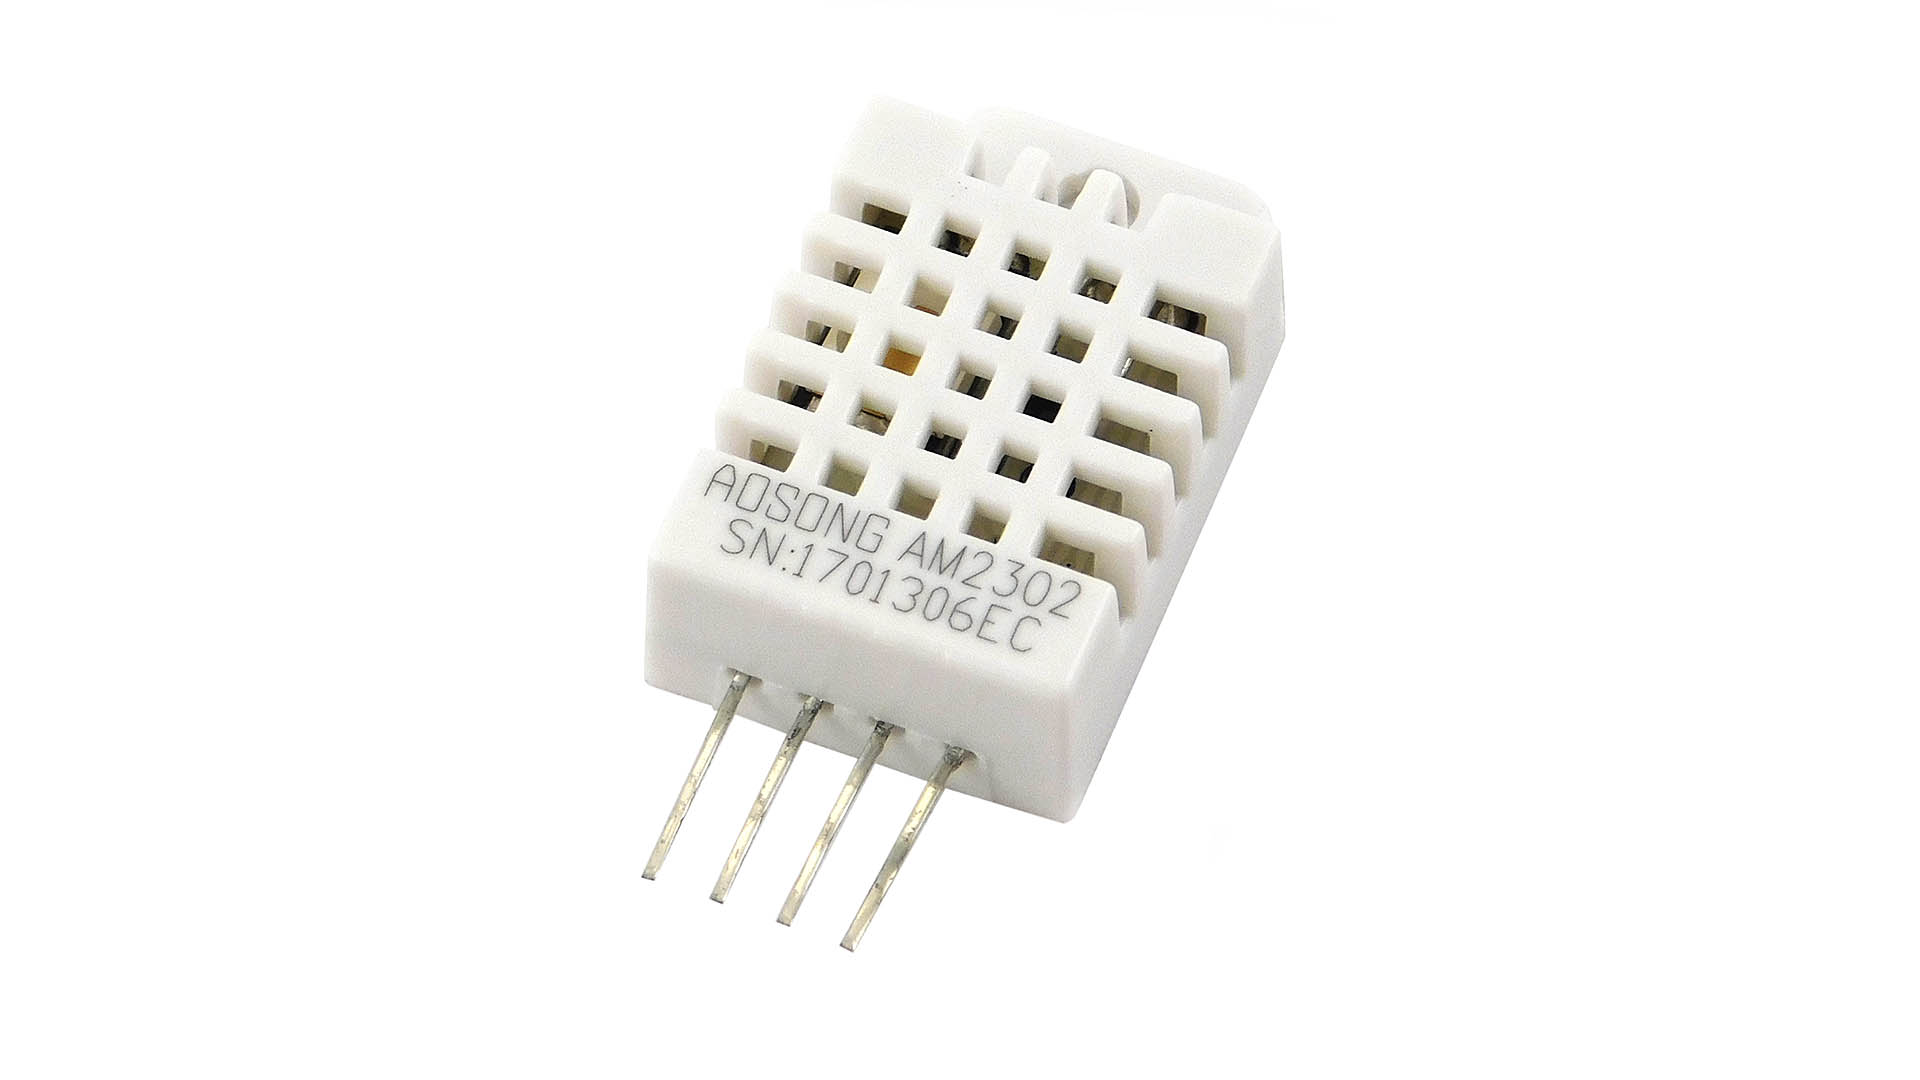 1Pack DHT22/AM2302 Digital Temperature and Humidity Sensor AM2302 White 